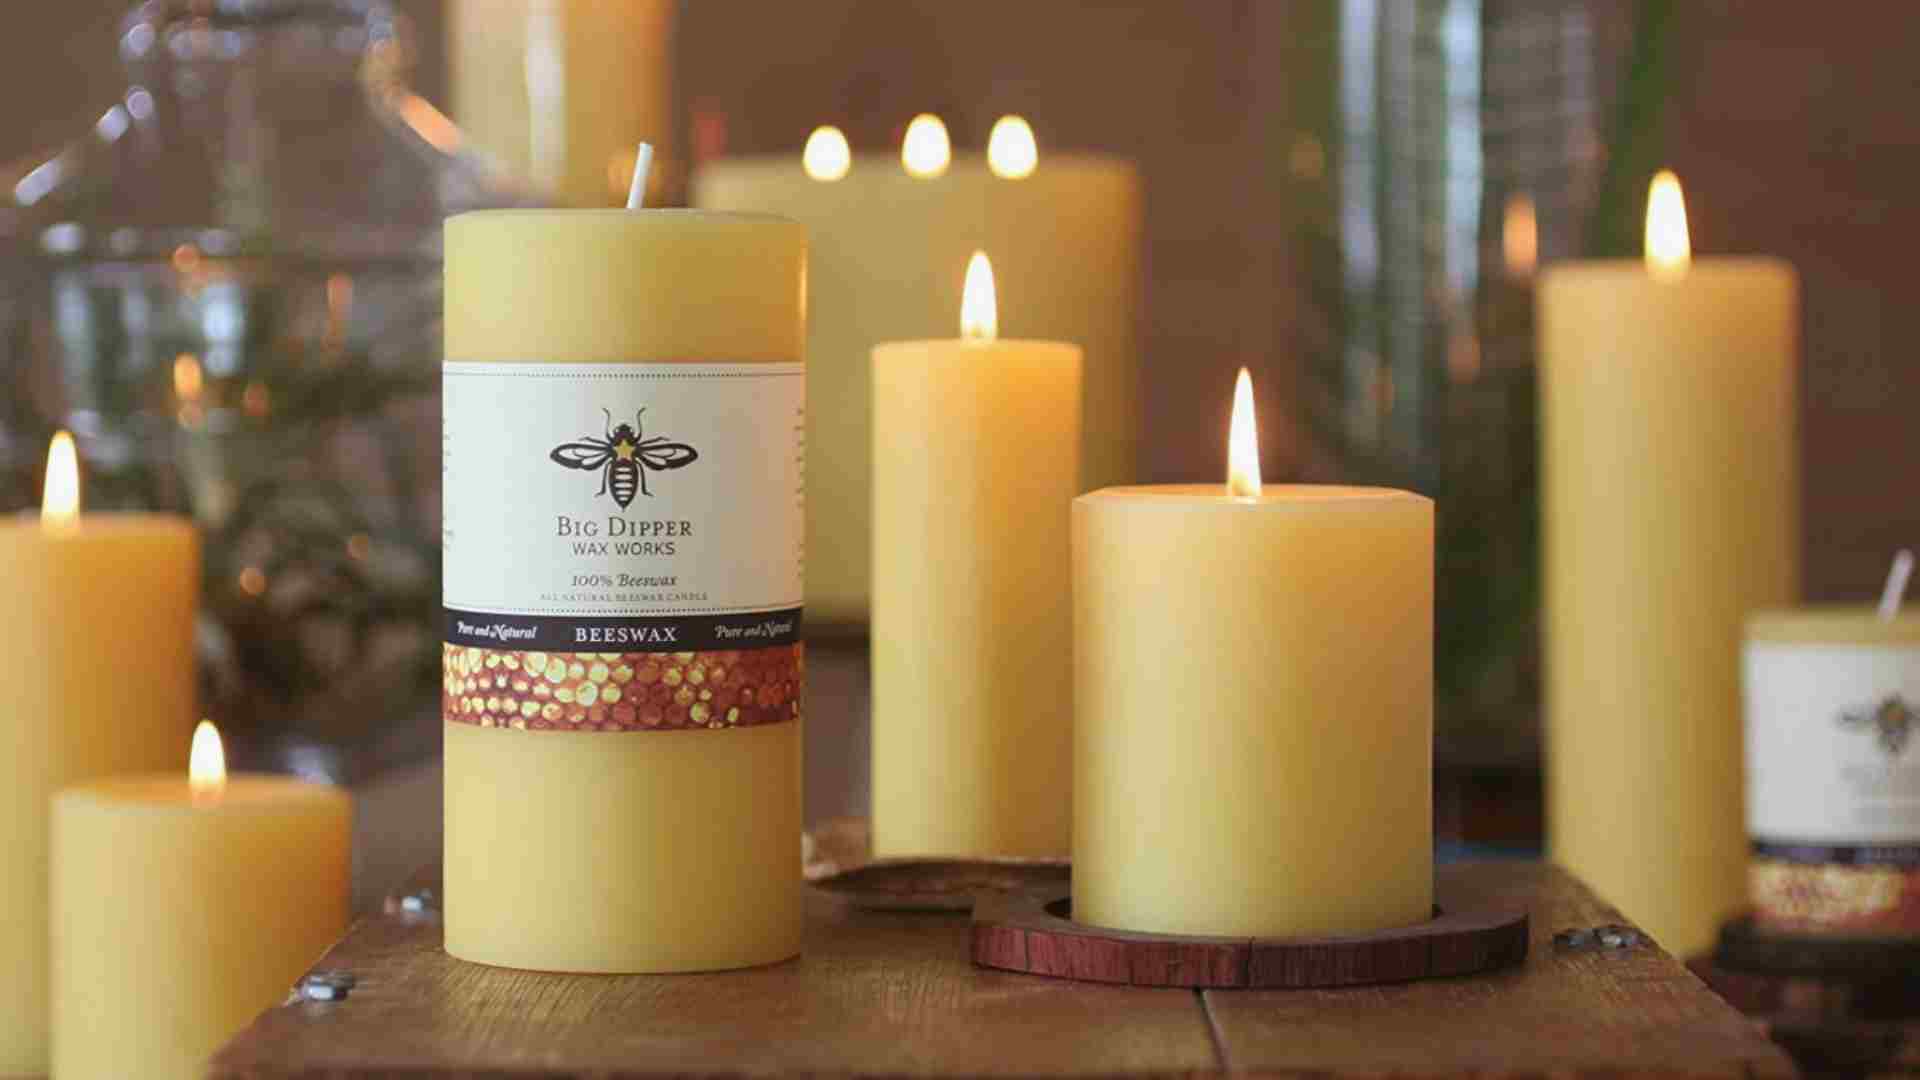 Big Dipper beeswax candles